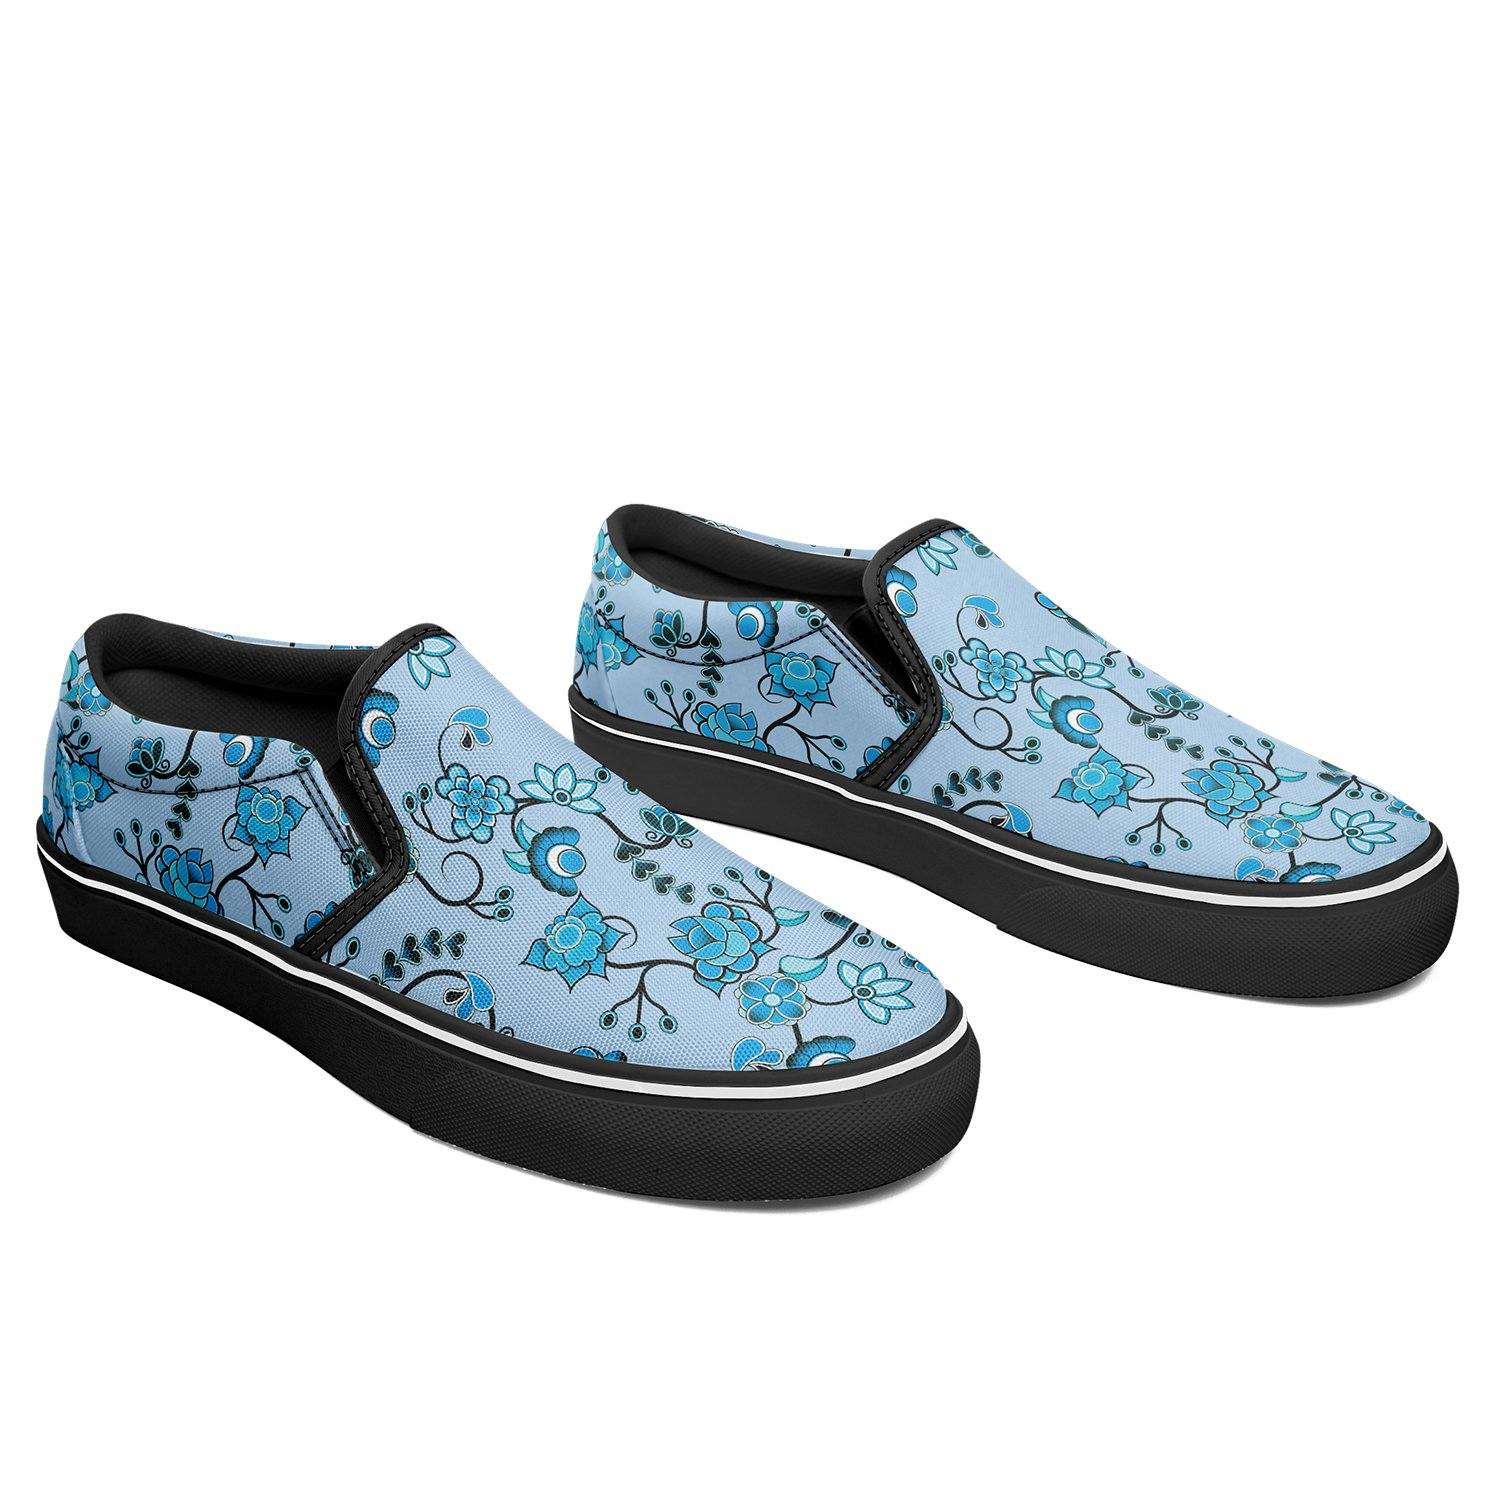 Blue Floral Amour Otoyimm Canvas Slip On Shoes otoyimm Herman 